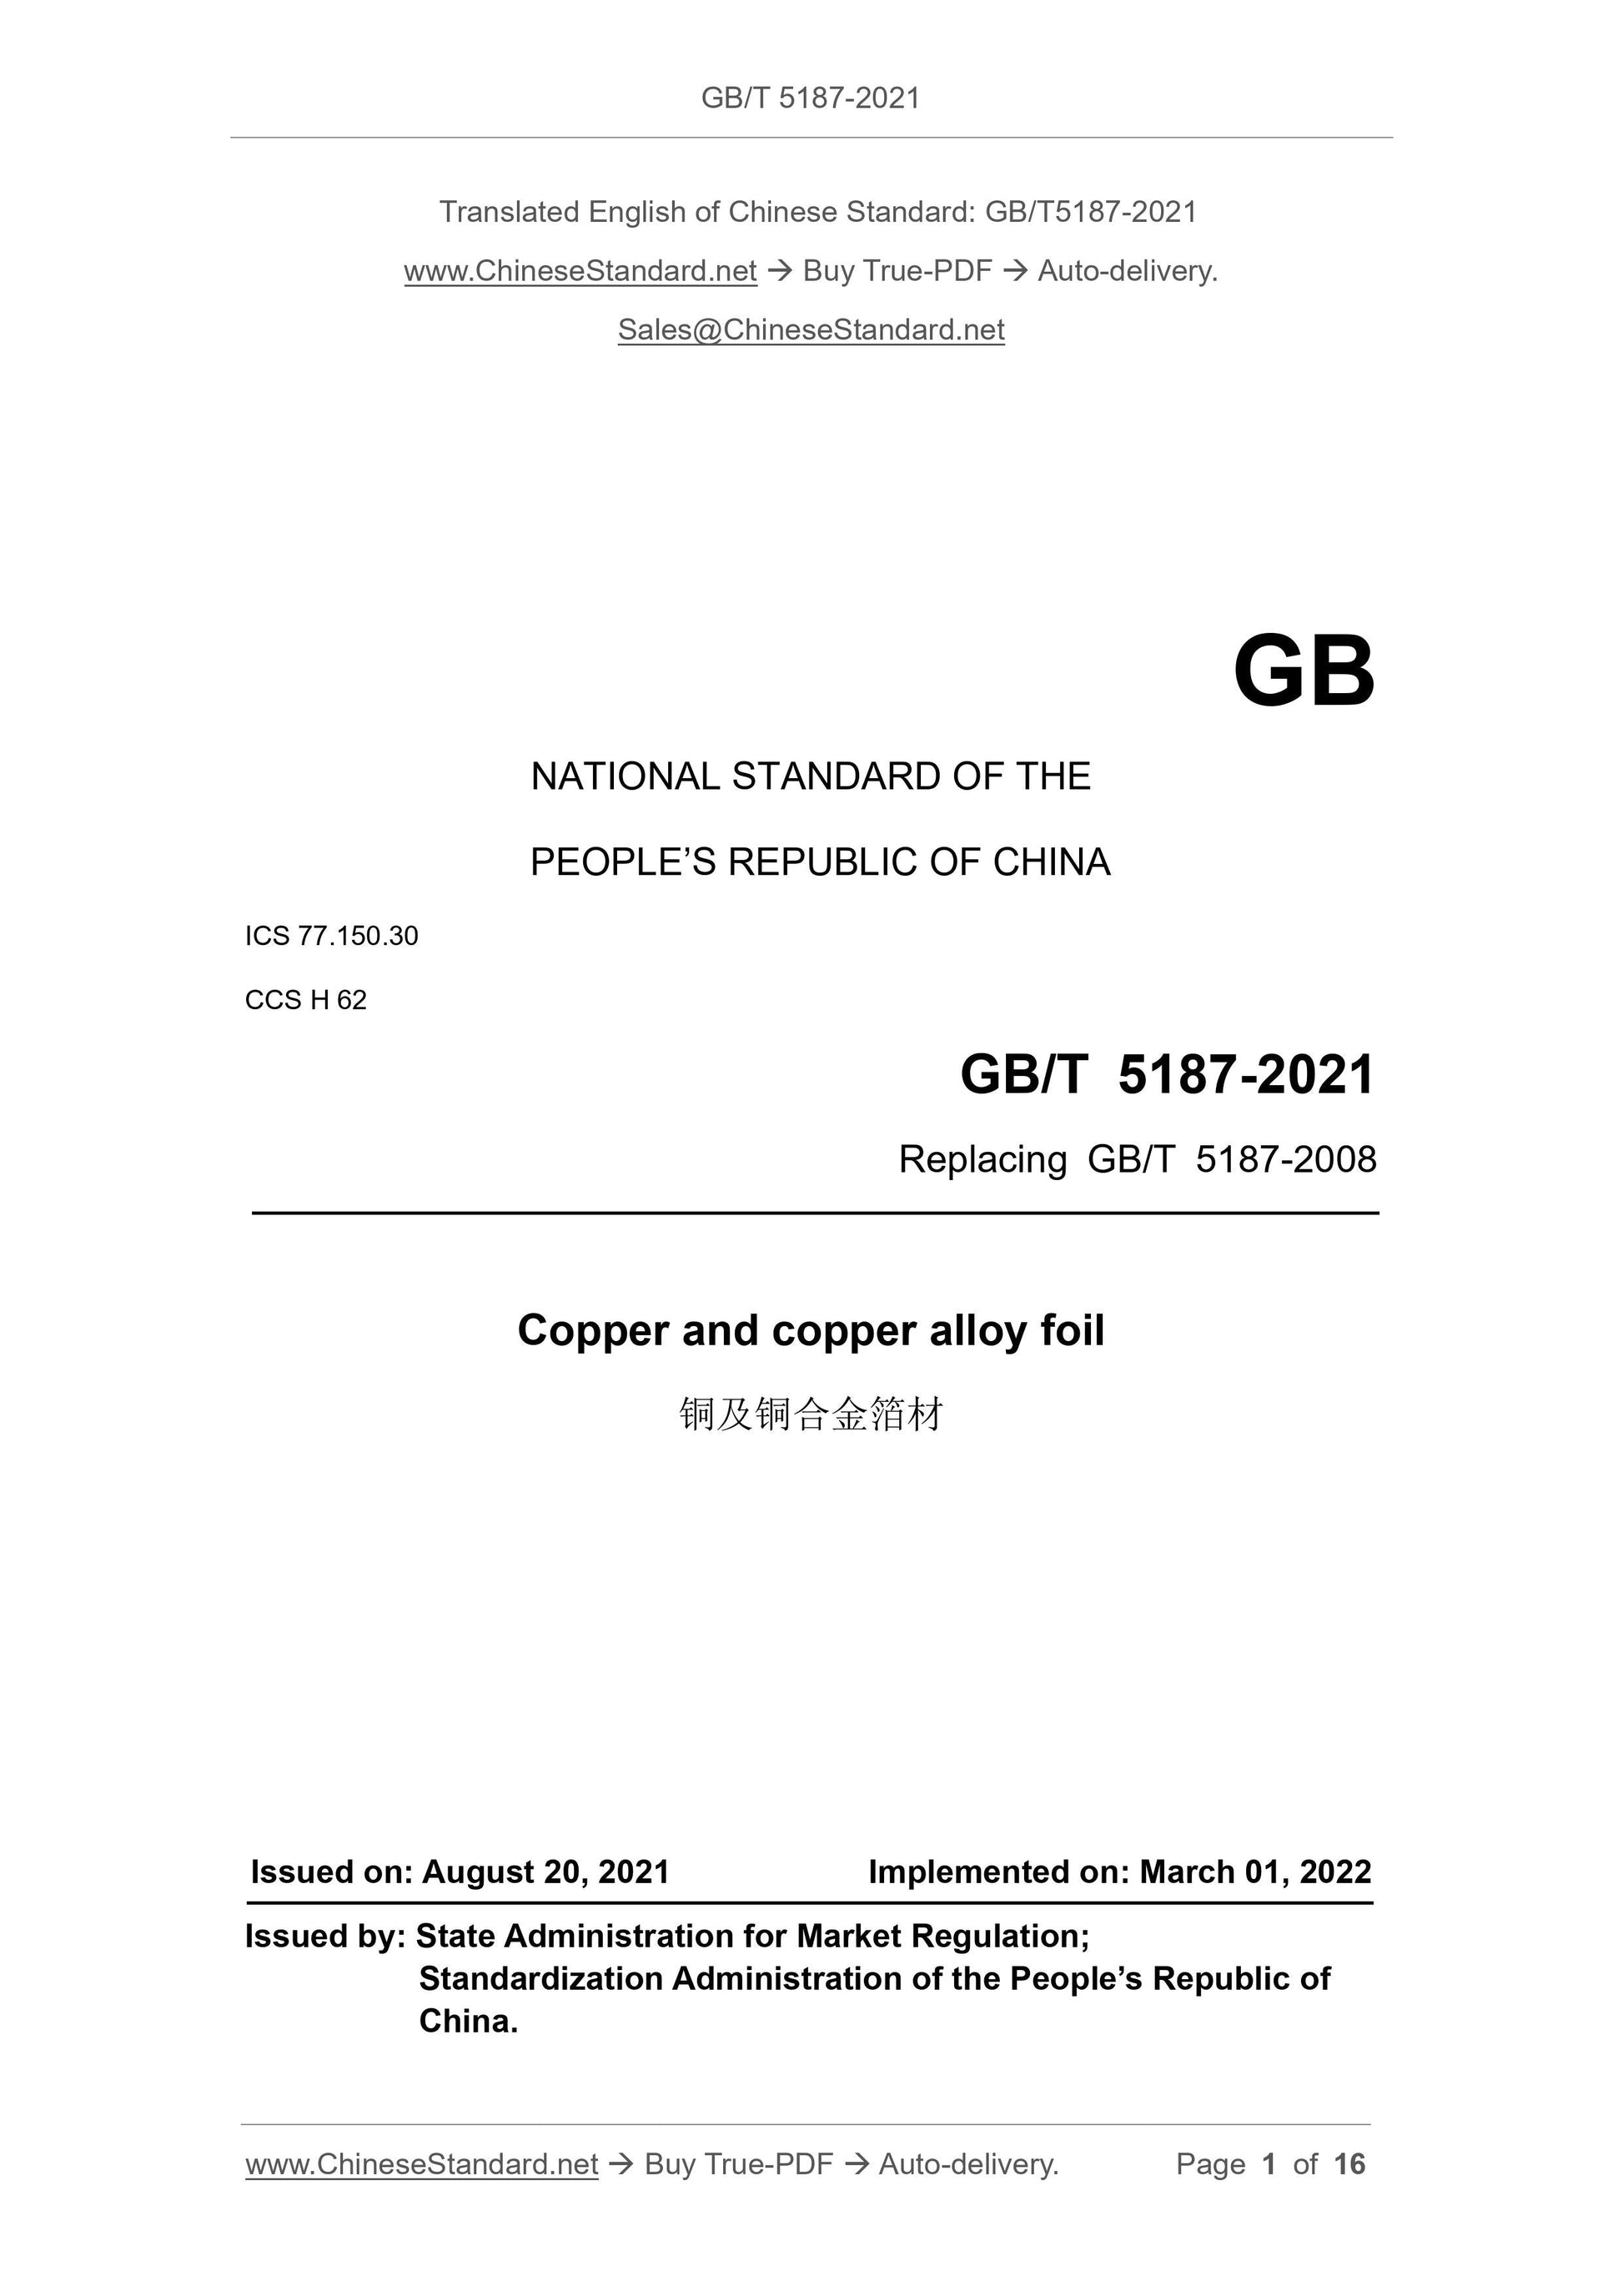 GB/T 5187-2021 Page 1